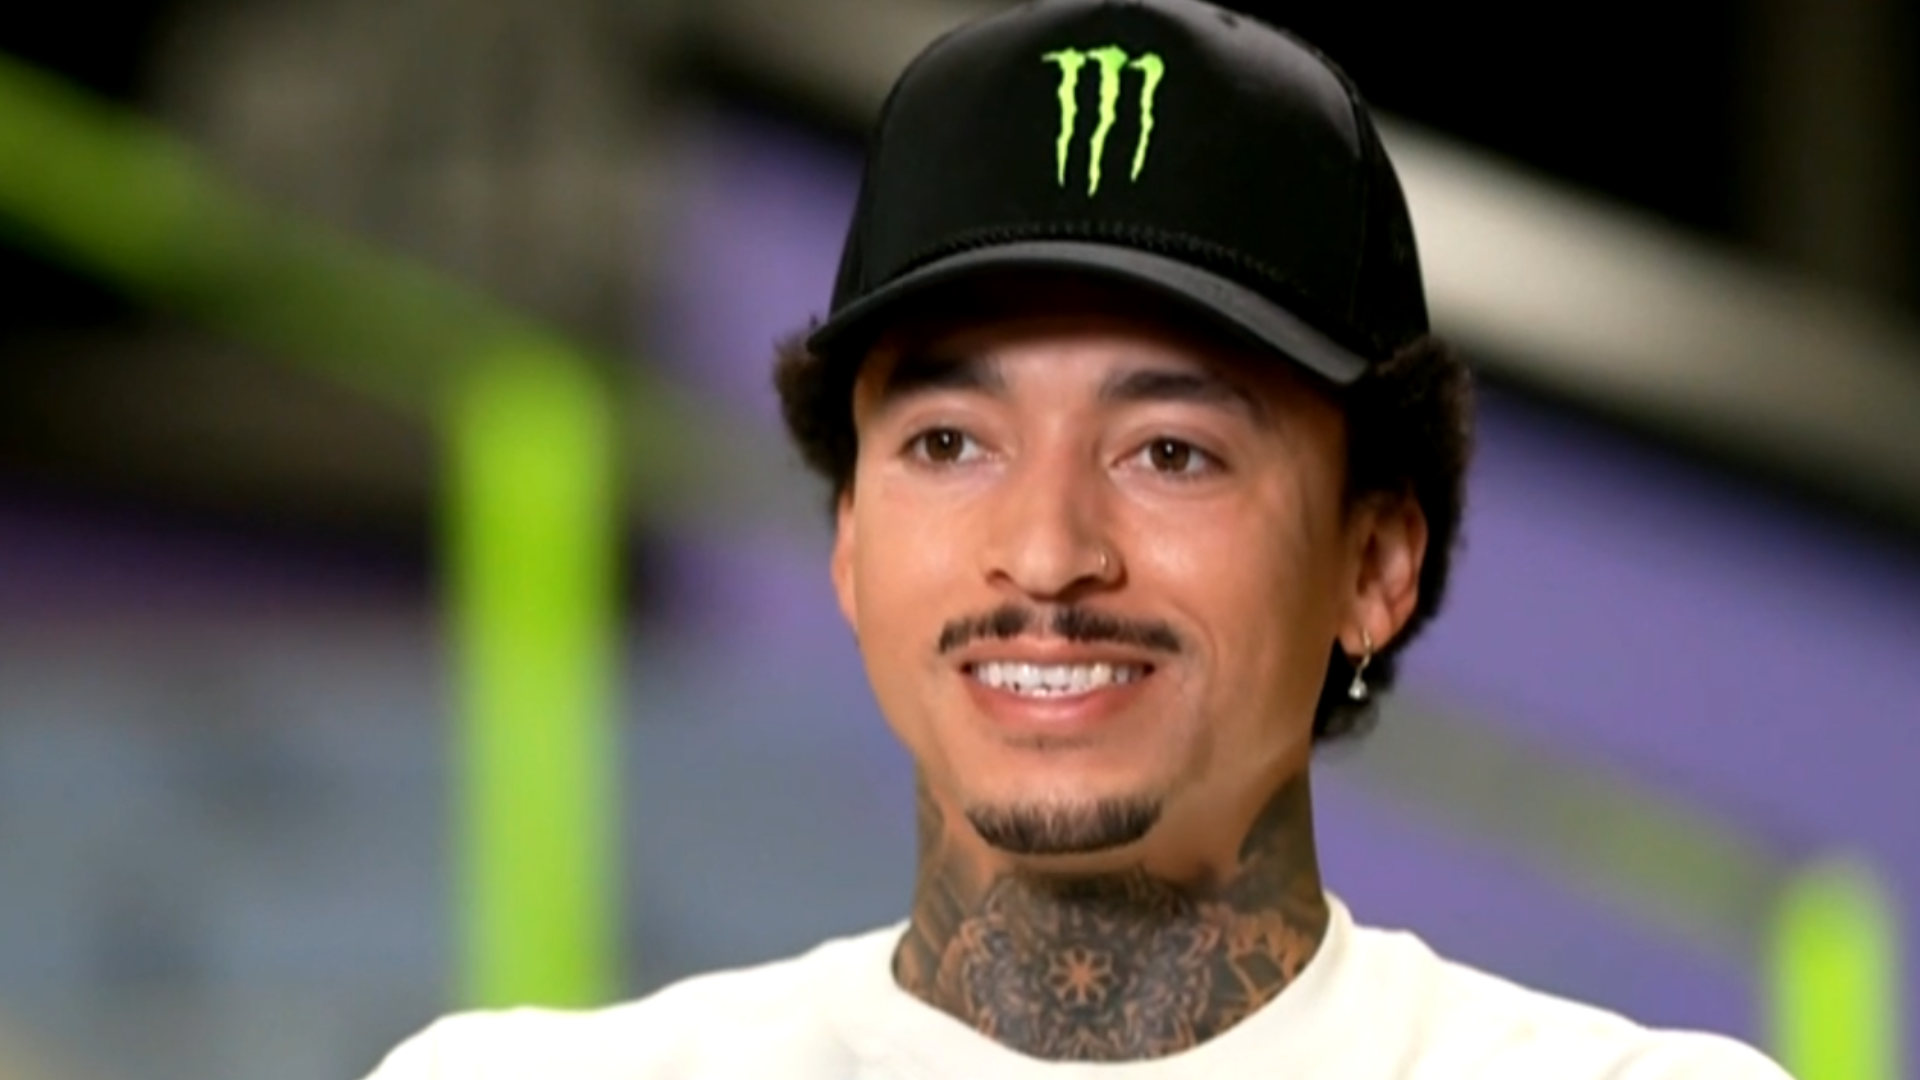 How Nyjah Huston overcame hardships for a chance at Olympic glory